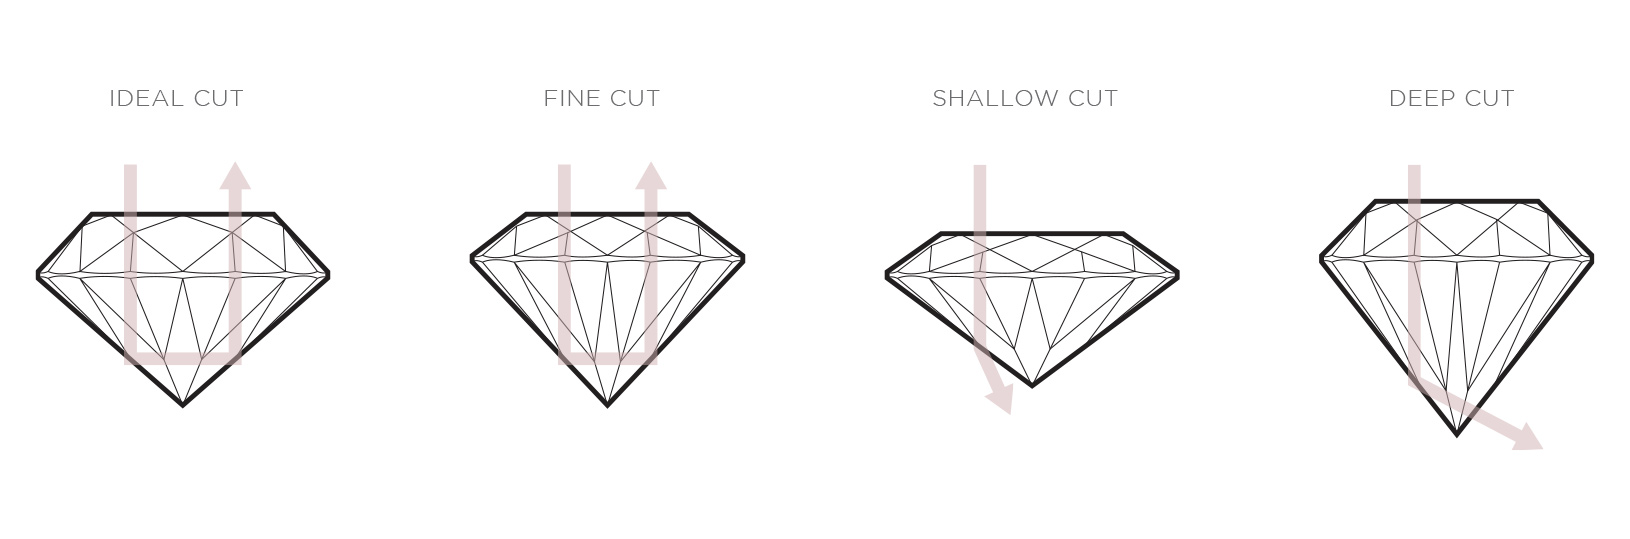 An infographic that shows different diamond cuts